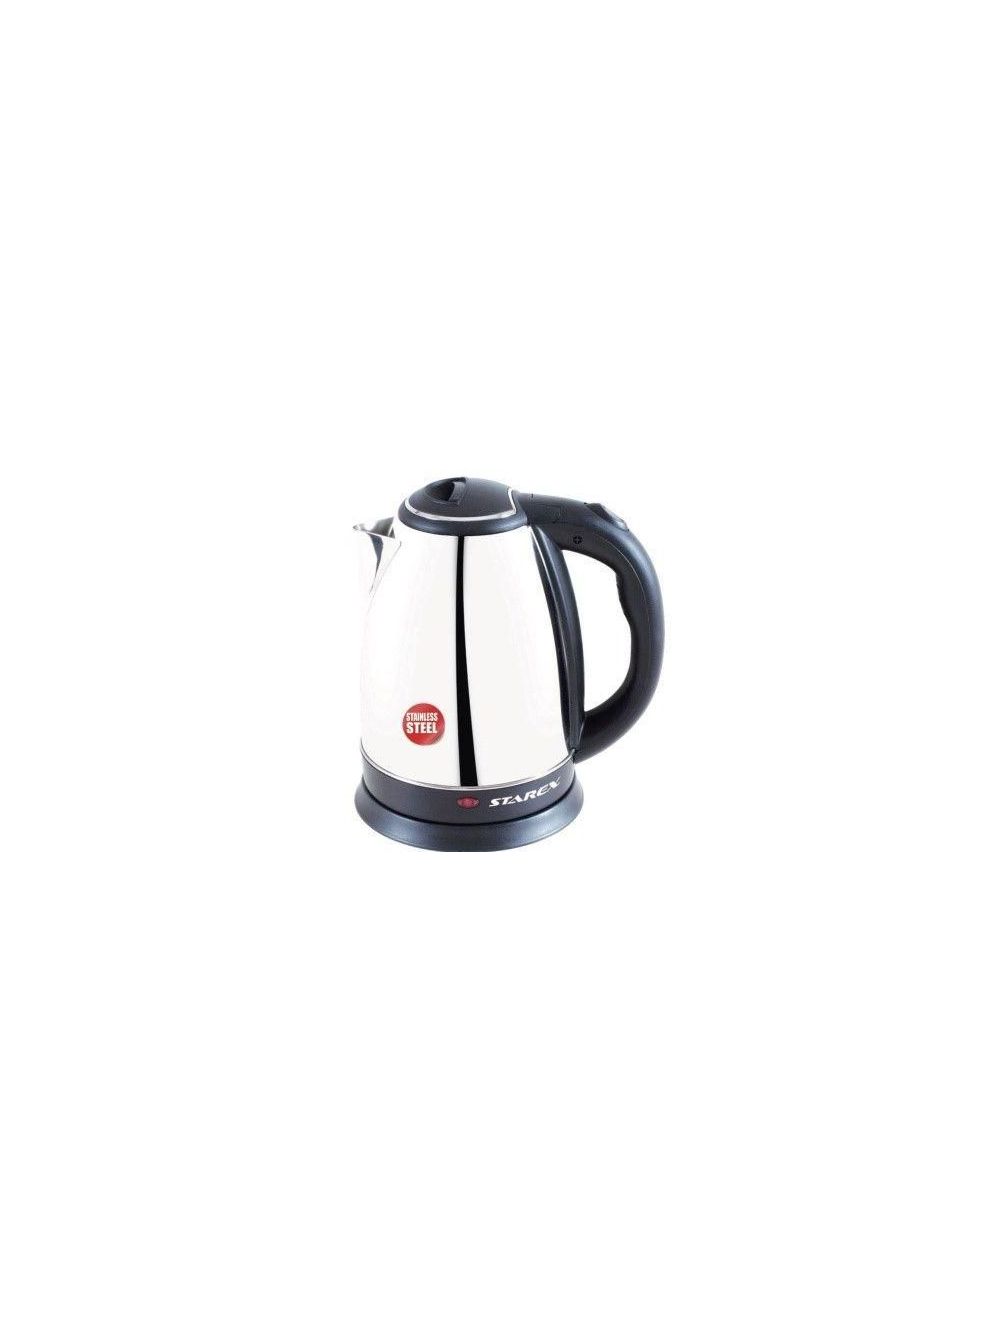 Starex Stainless Steel Kettle 1.8L-SK 505